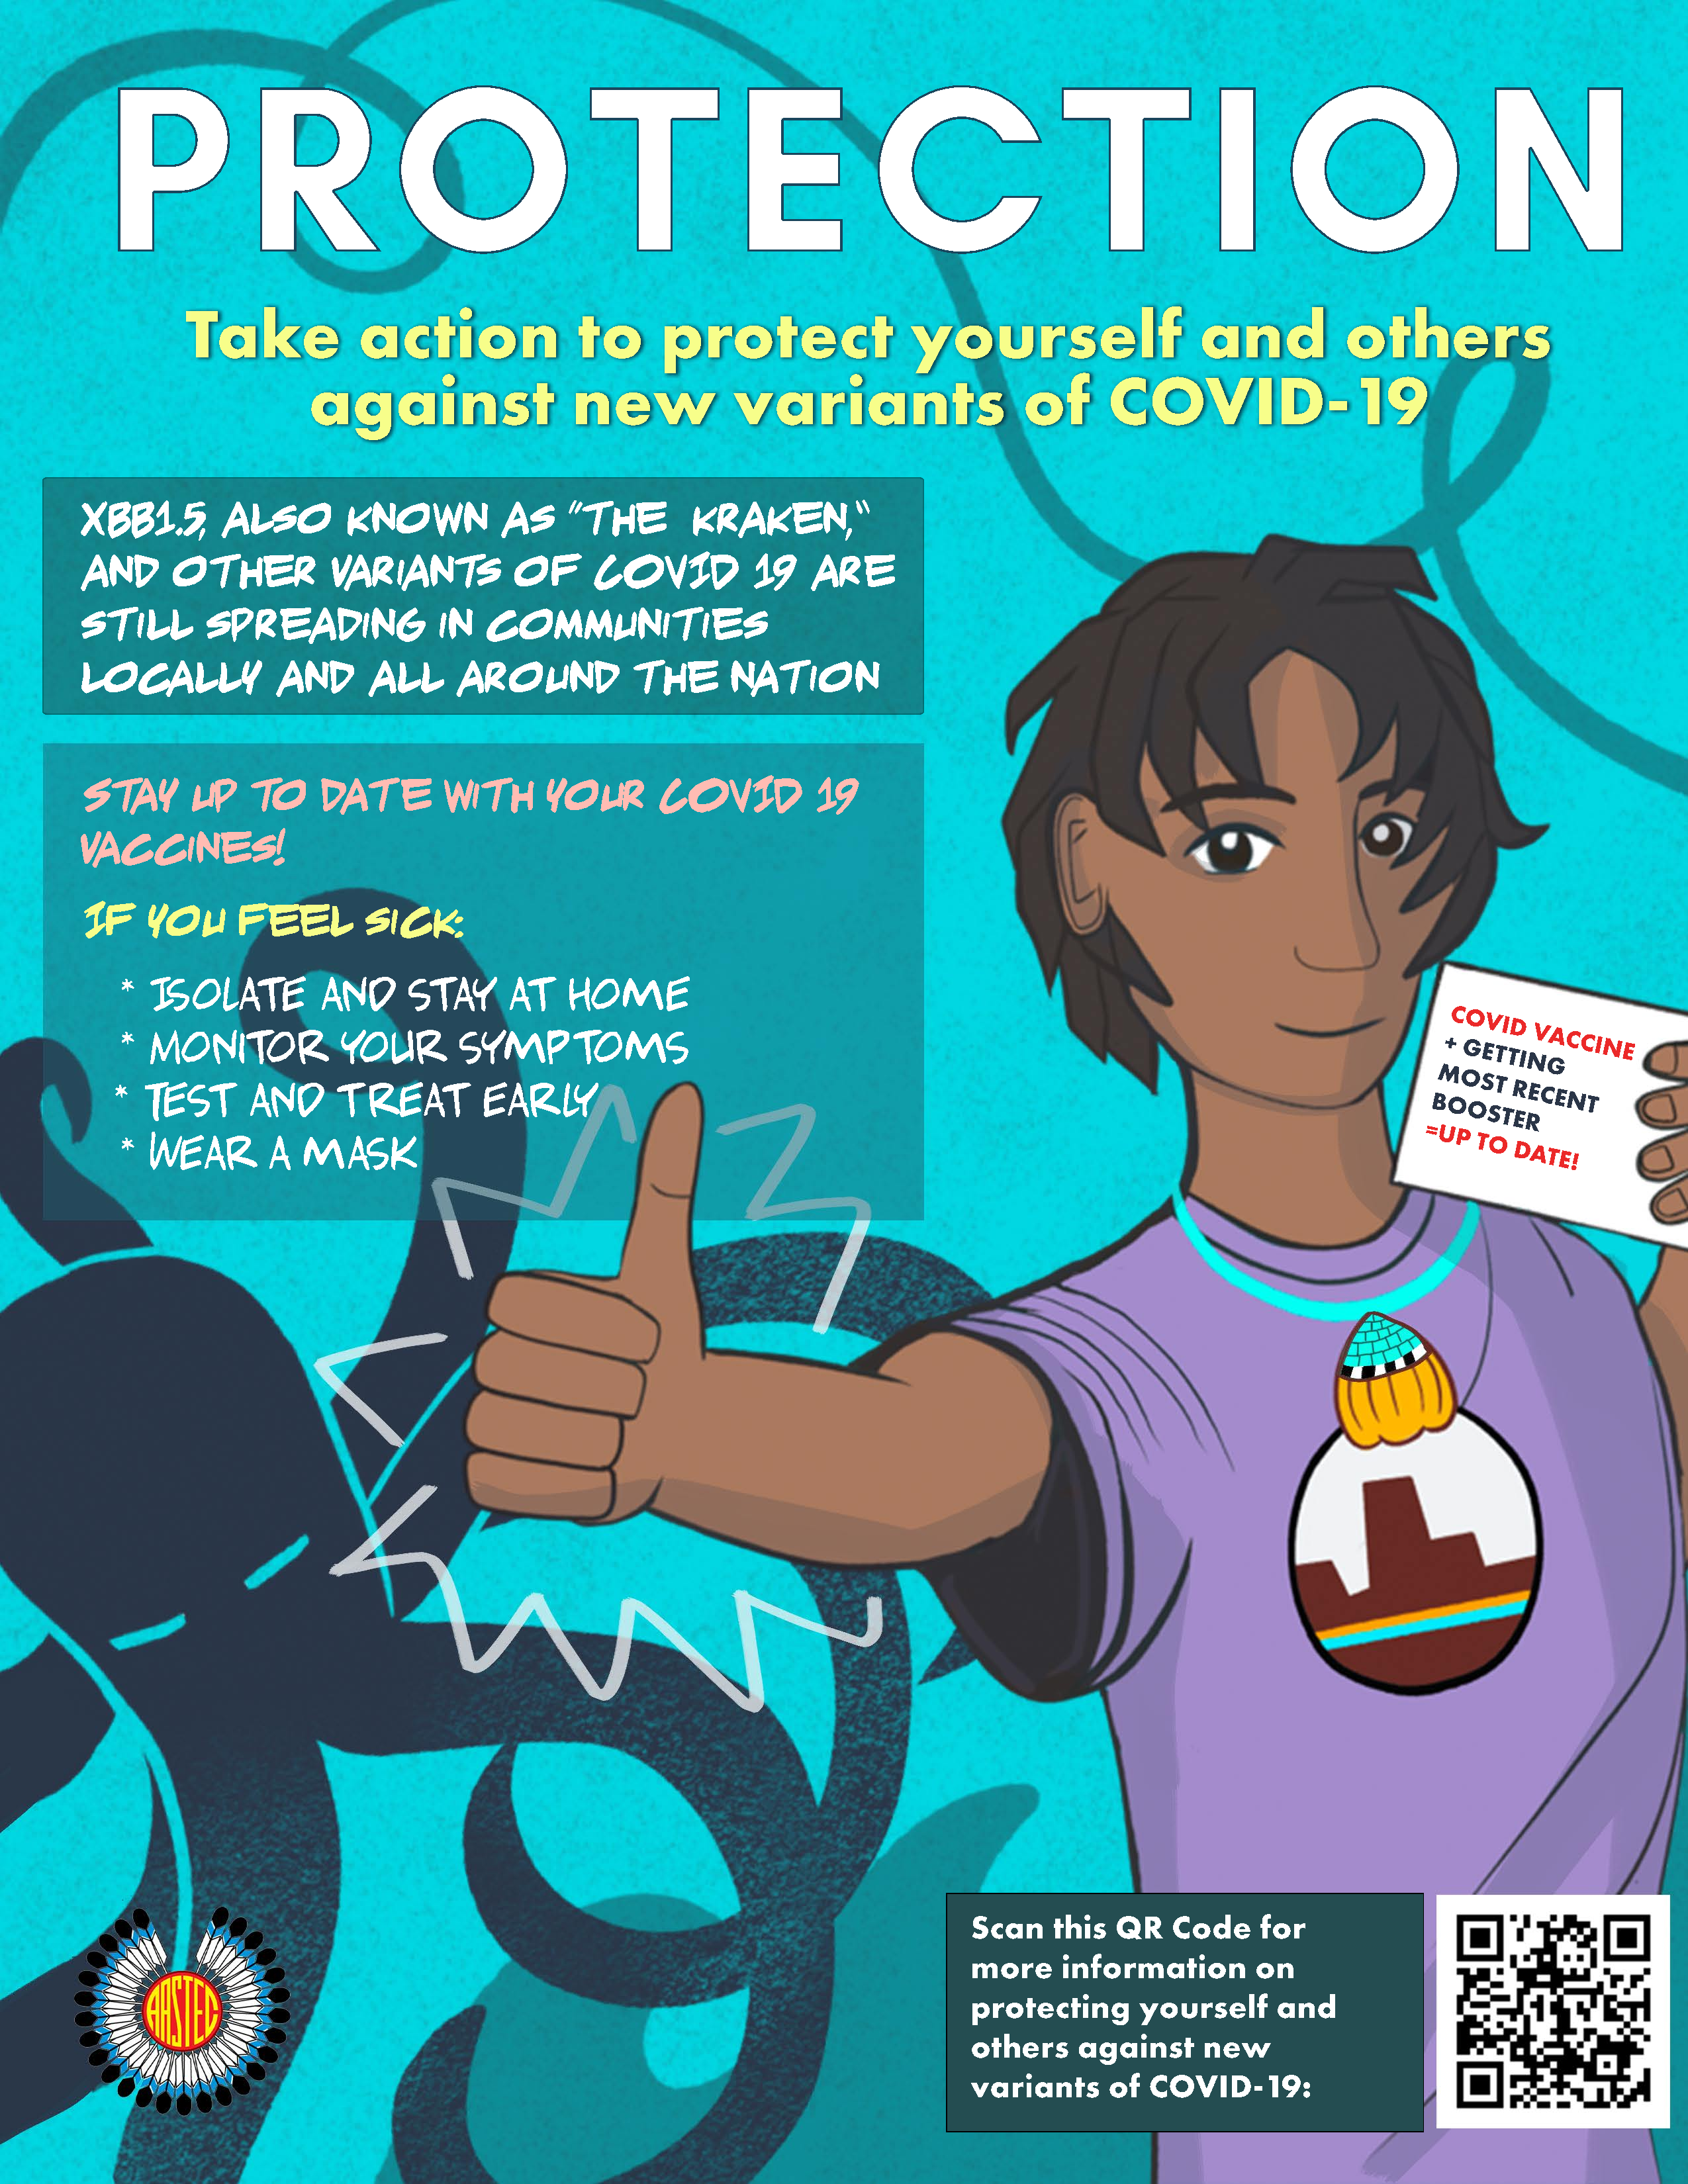 Cartoon image of young adult man giving a thumbs up and holding a notecard. Flyer background is ocean blue with a cartoon octopus. QR code in bottom right. 